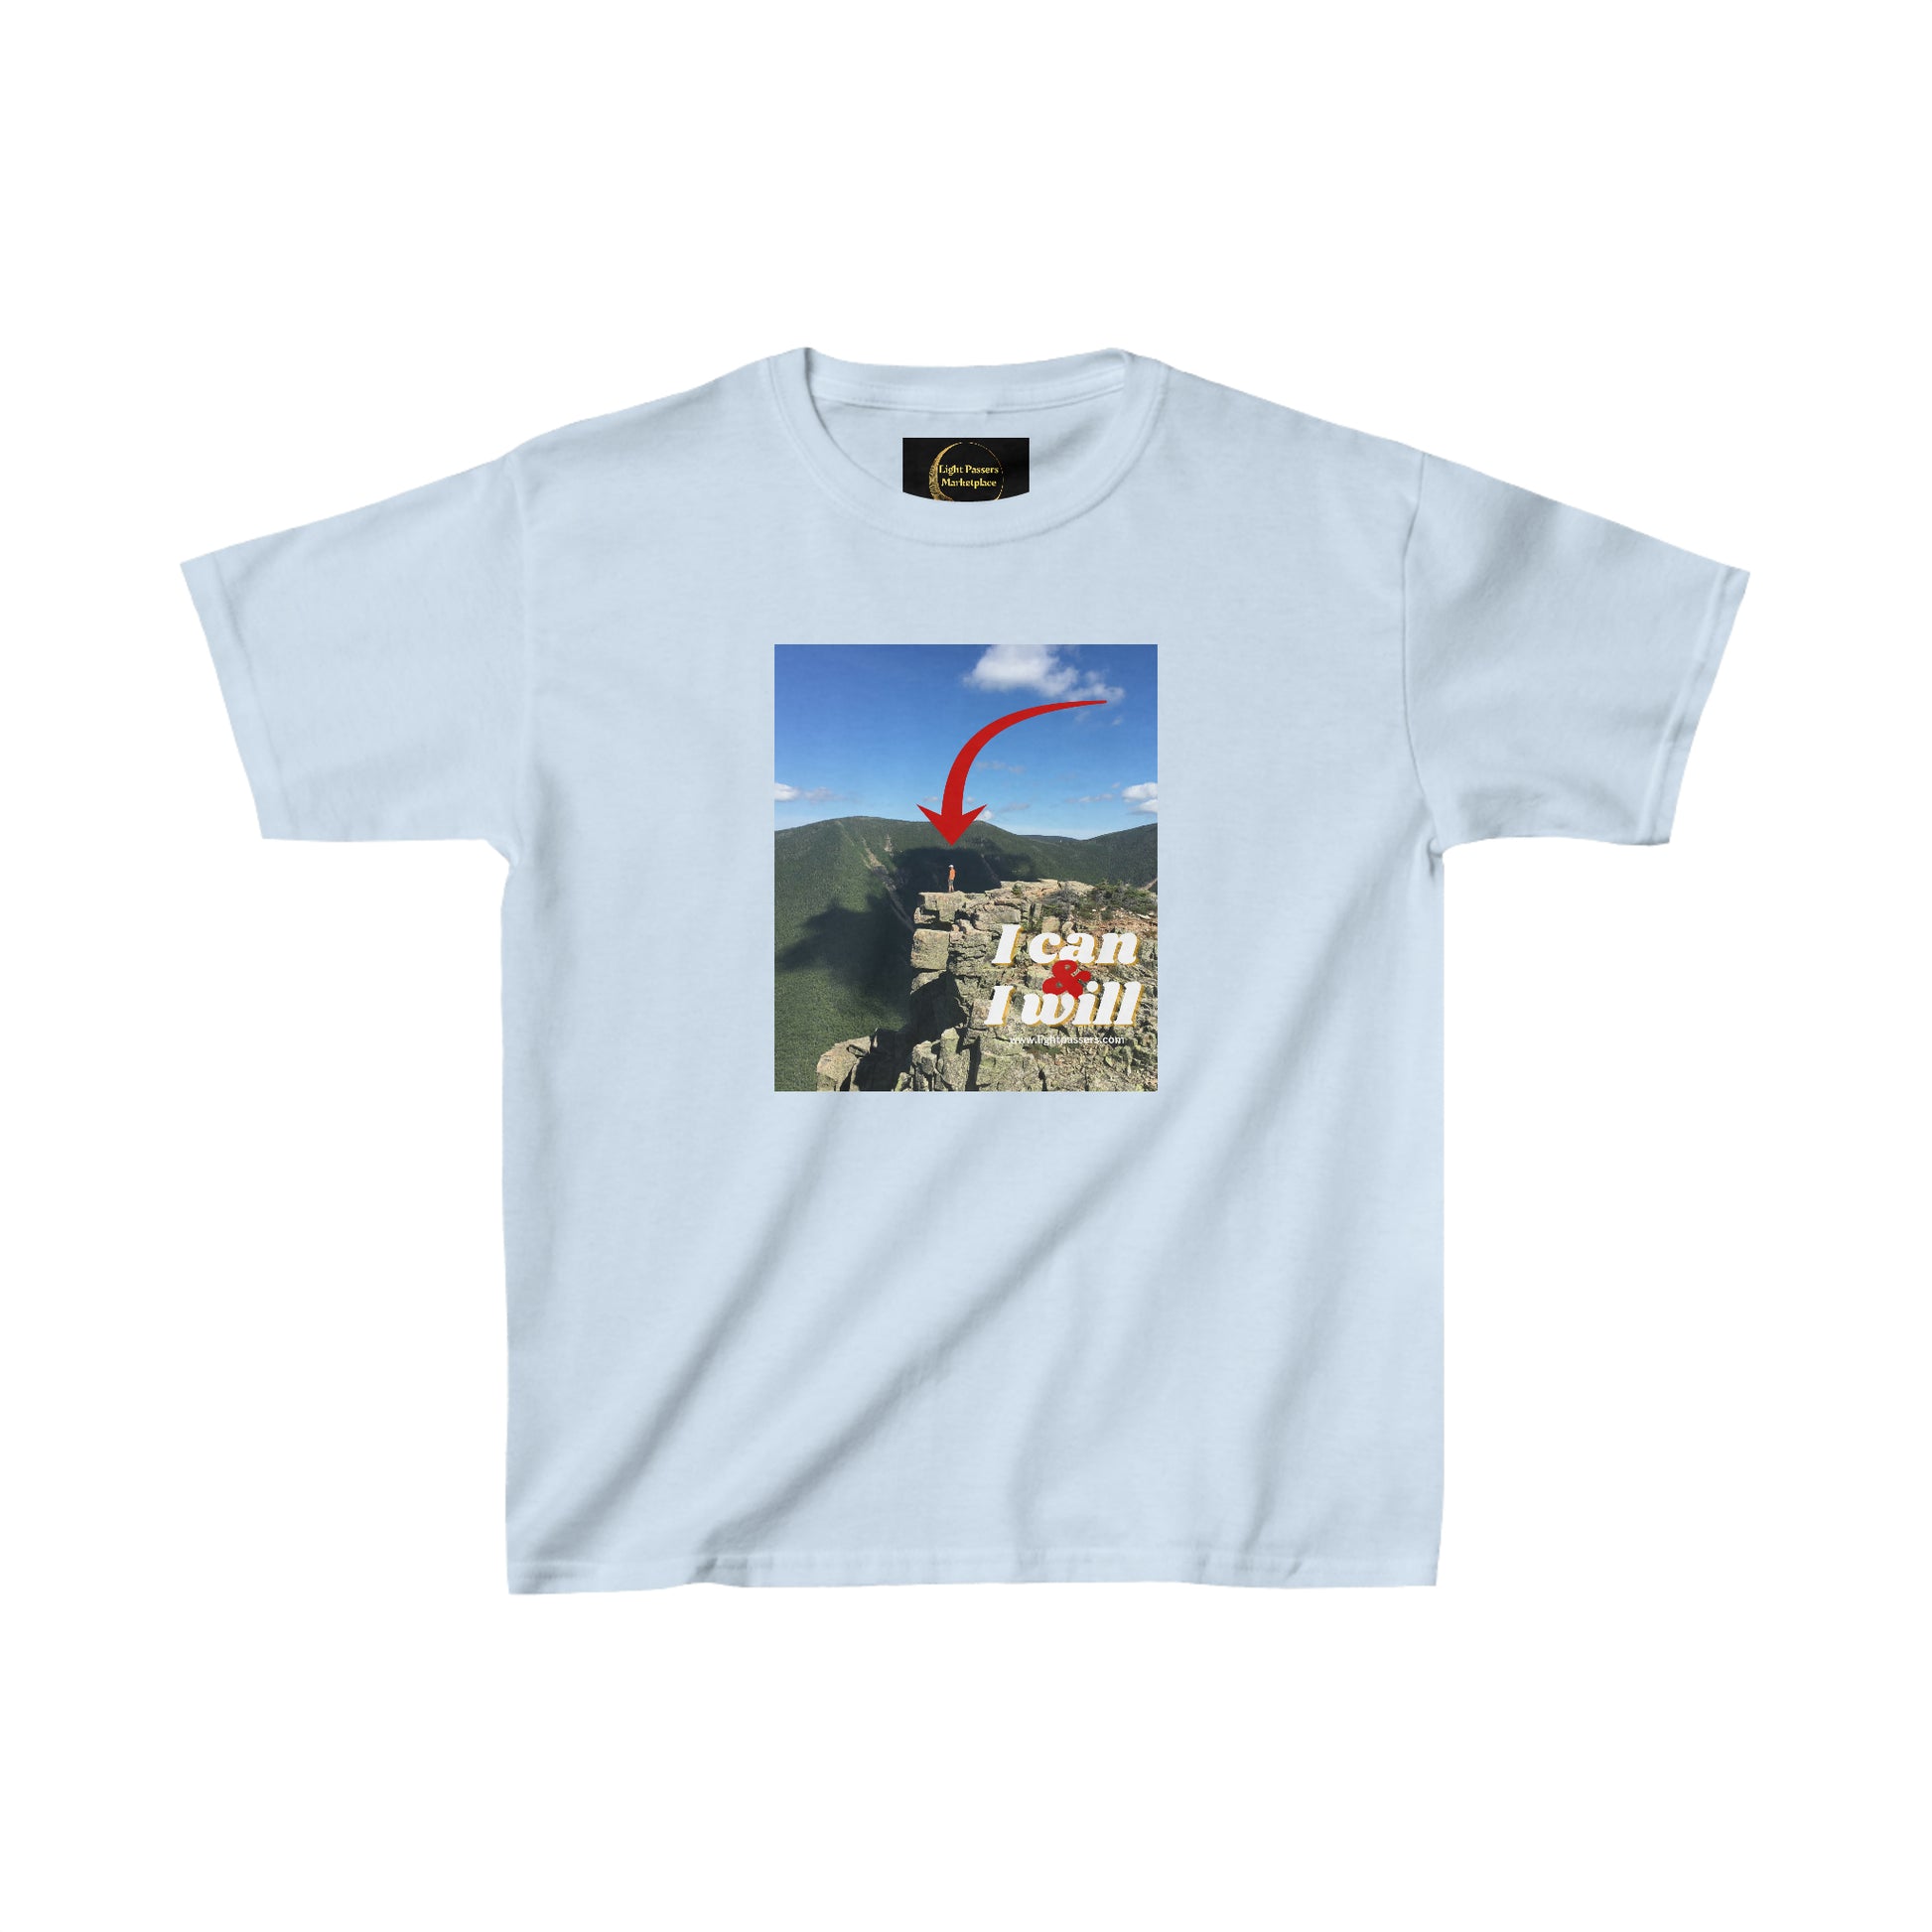 Youth white t-shirt featuring a mountain and red arrow graphic. 100% cotton fabric, twill tape shoulders, curl-resistant collar, no side seams. Ethically made with US cotton.